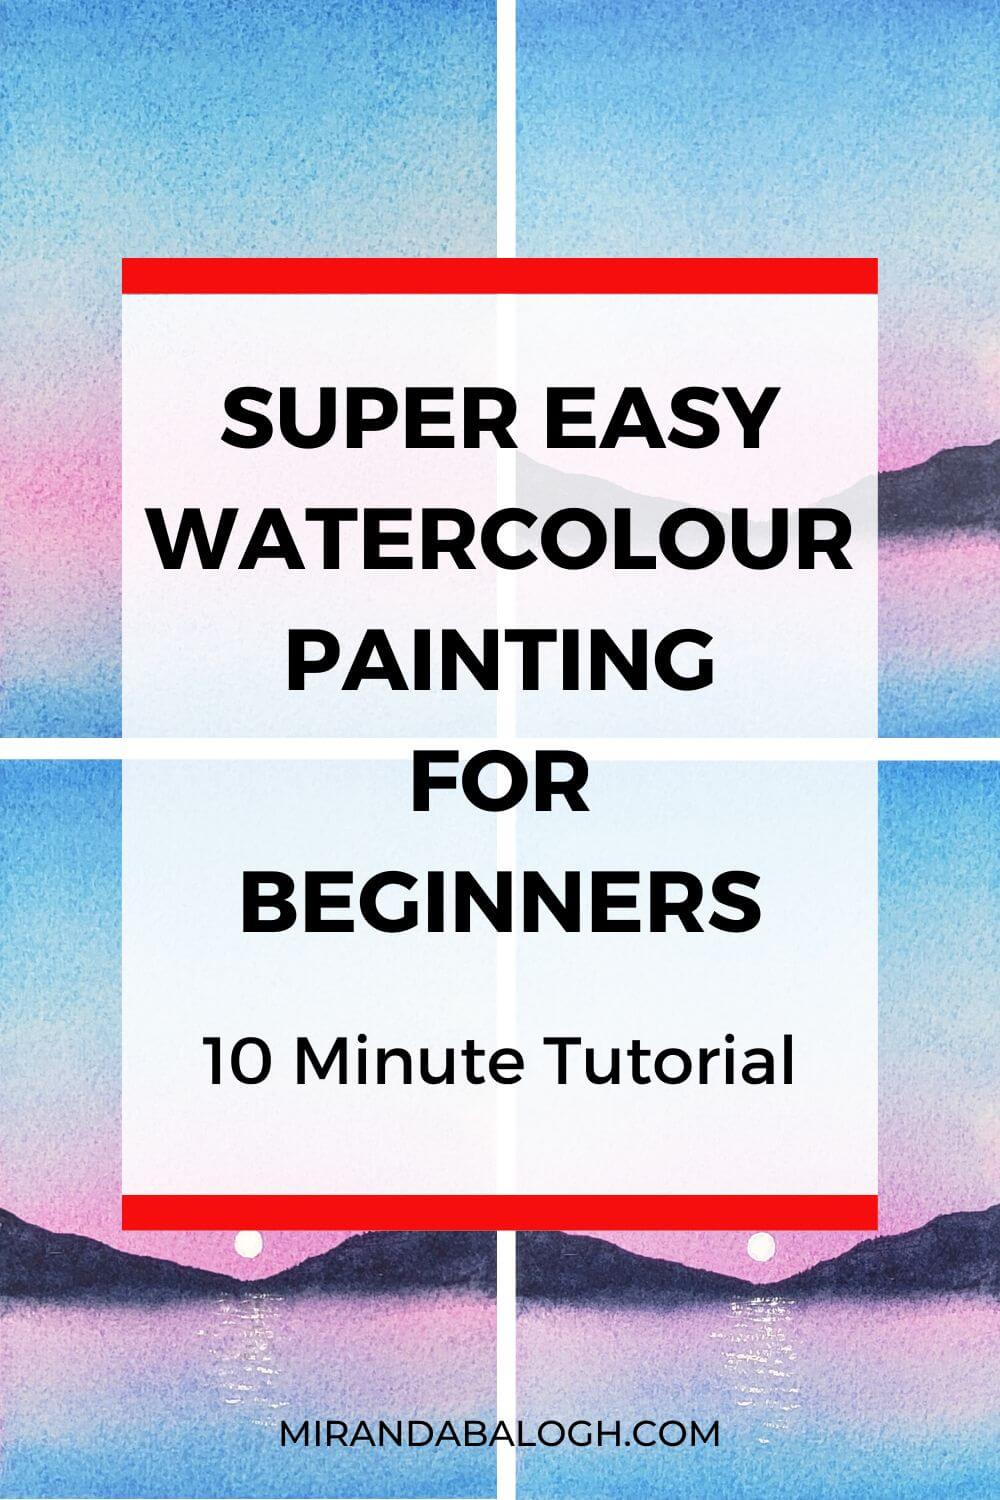 Watercolour Painting for Beginners: An Easy, Step-by-Step Tutorial